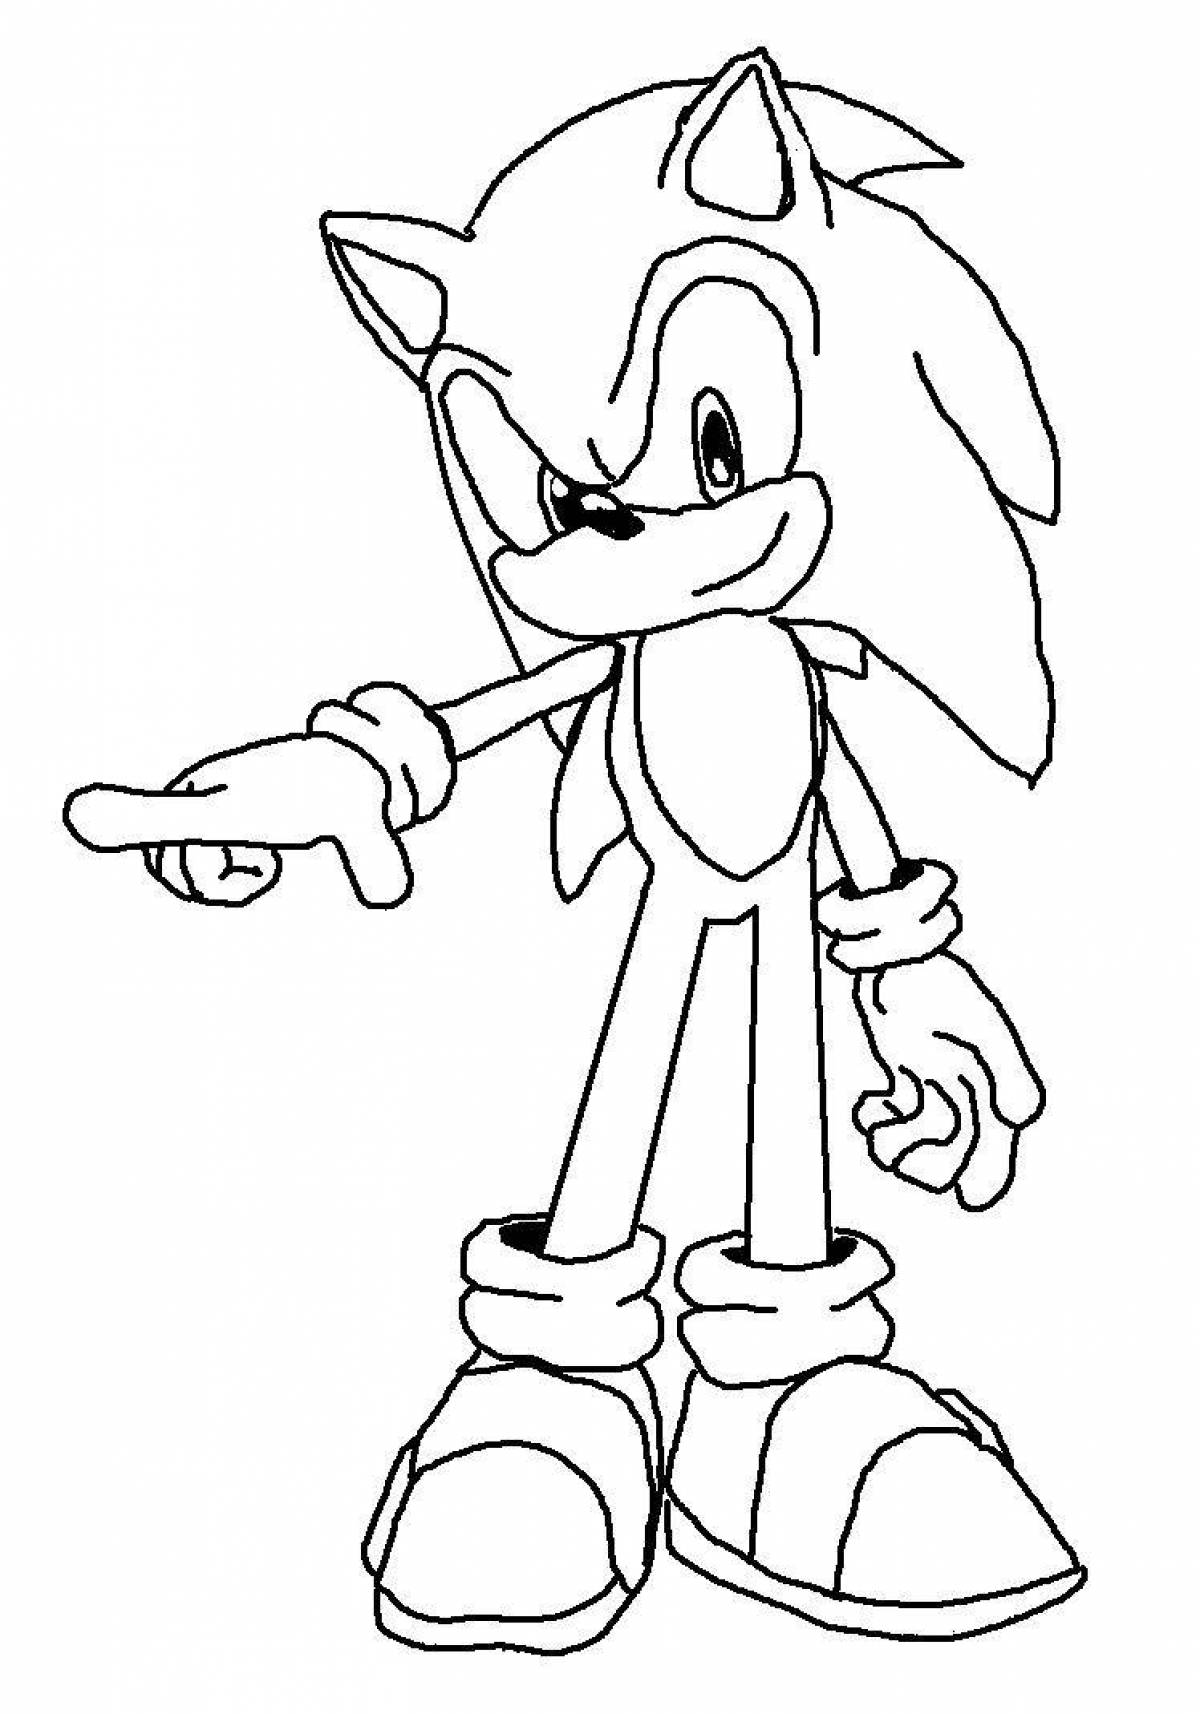 Charming sonic the hedgehog coloring book